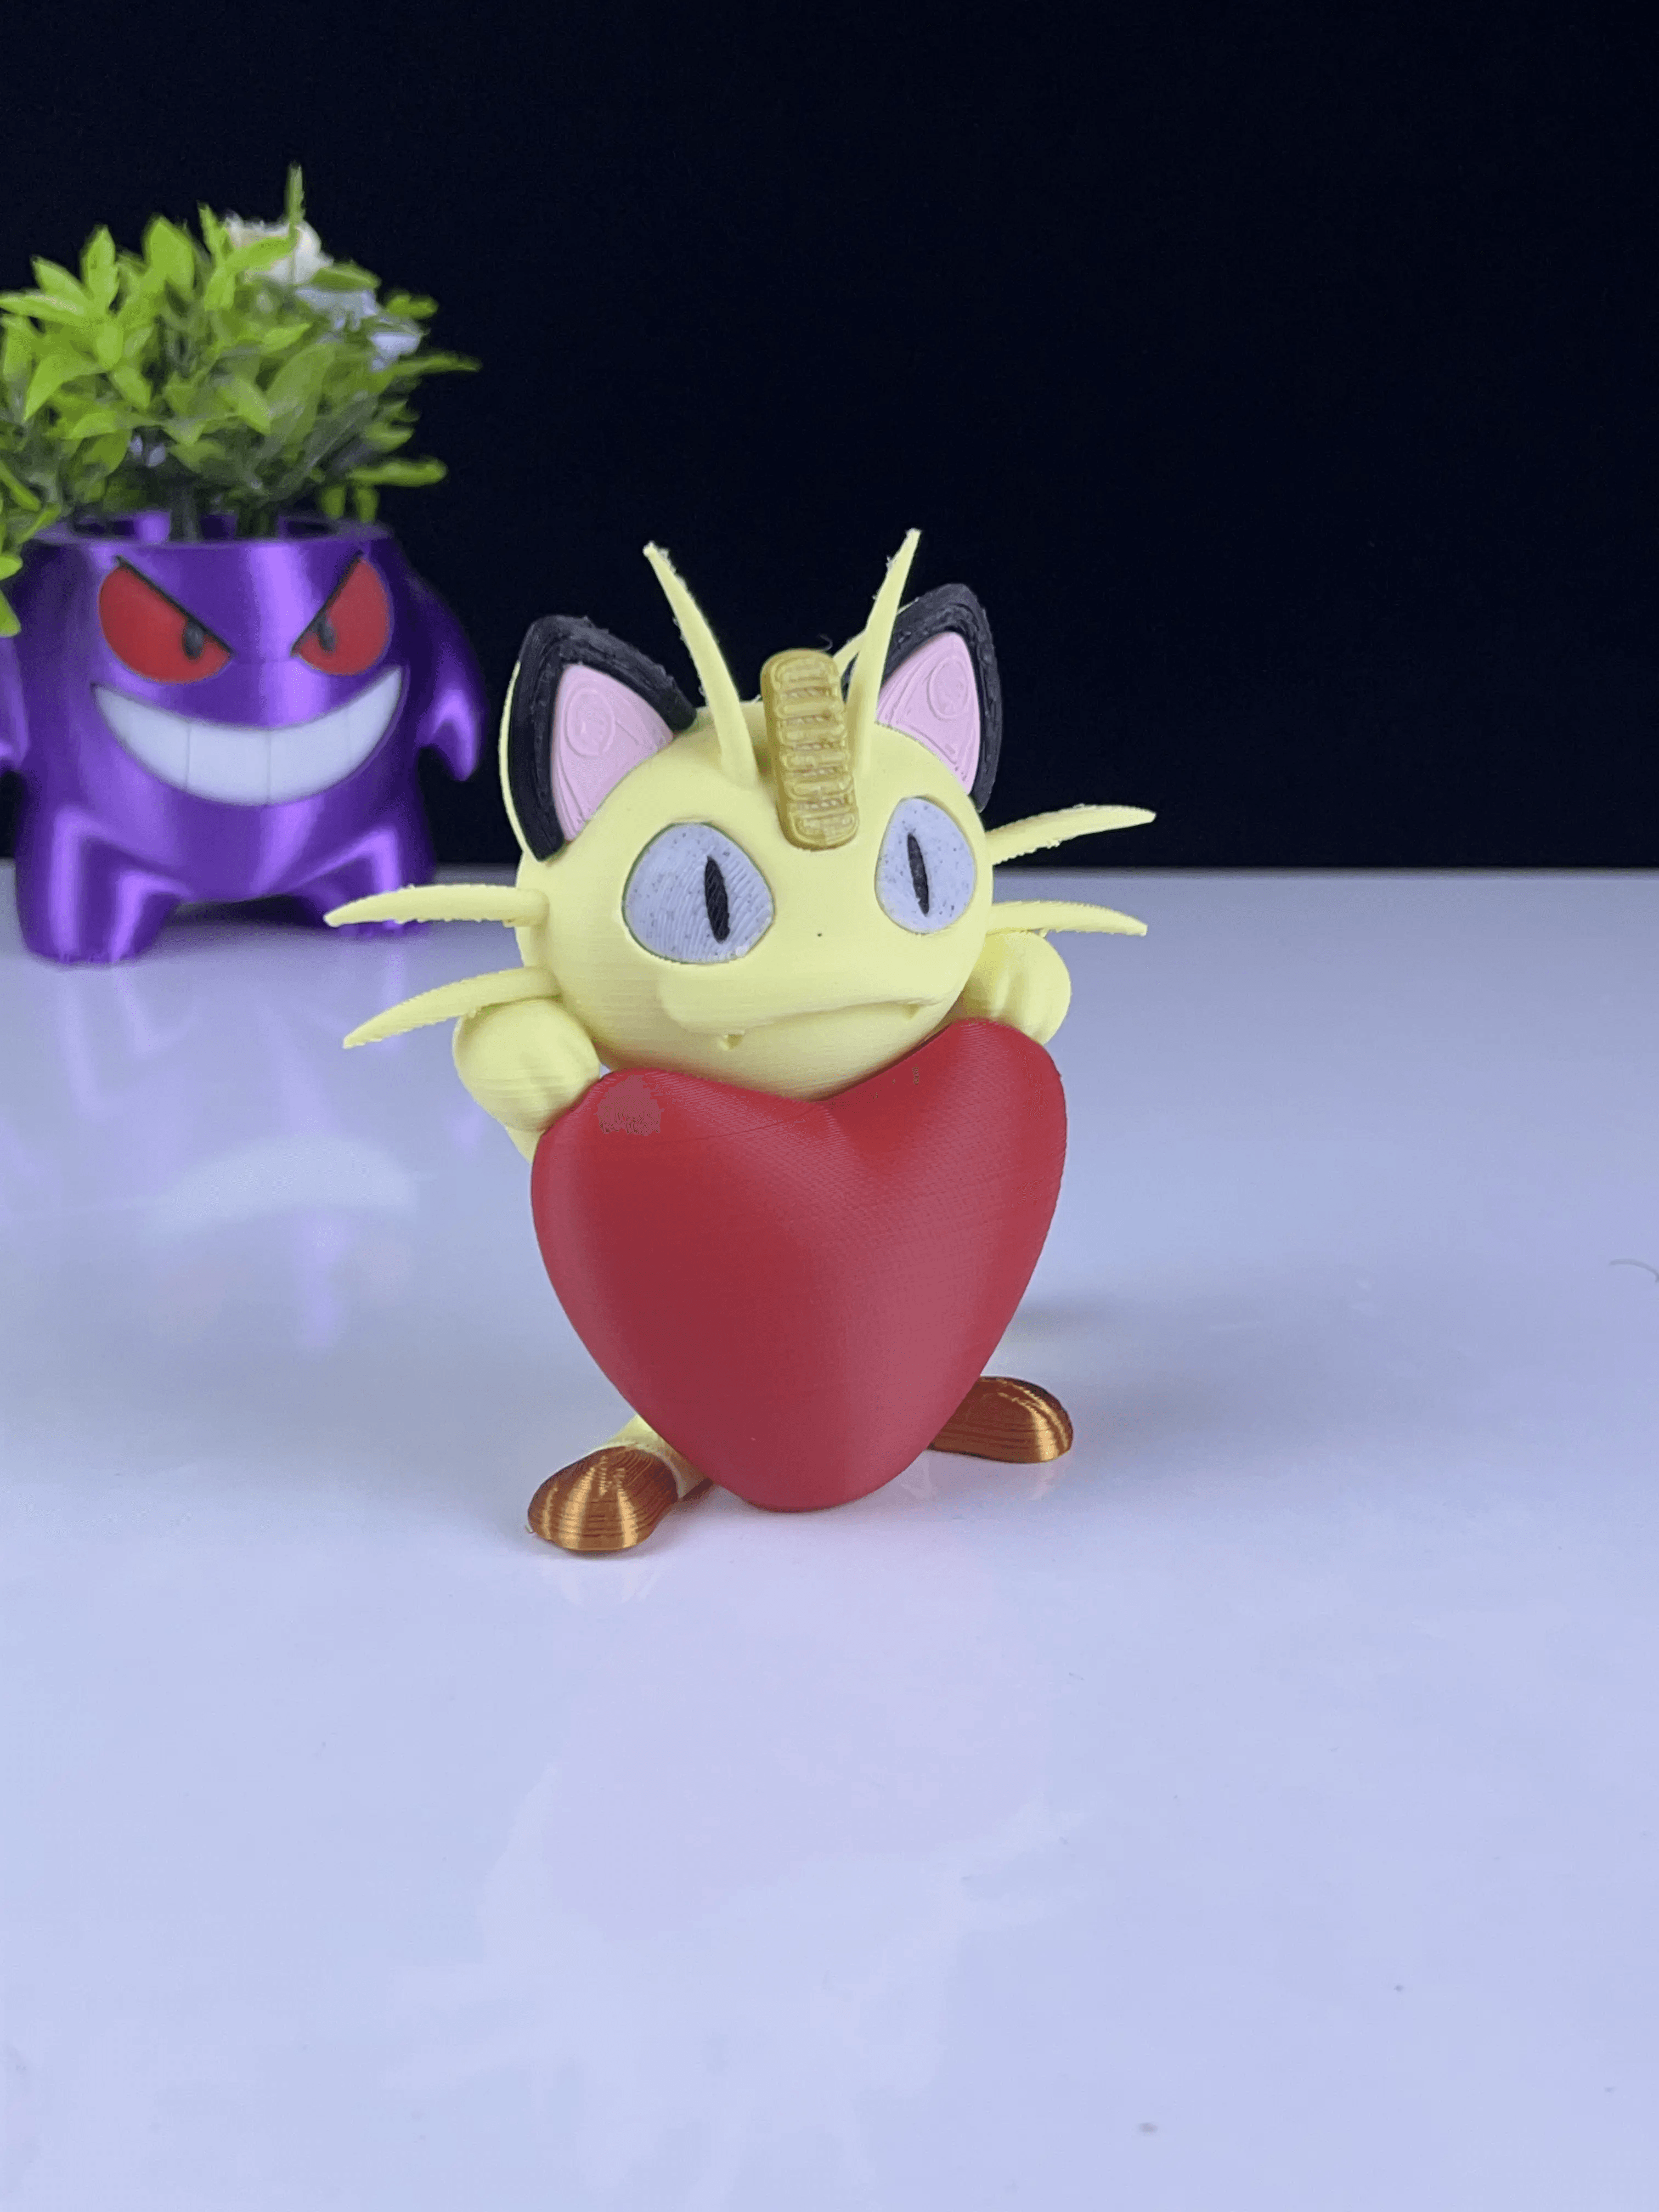 Heartful Meowth Gift for your Wife / Husband  3d model